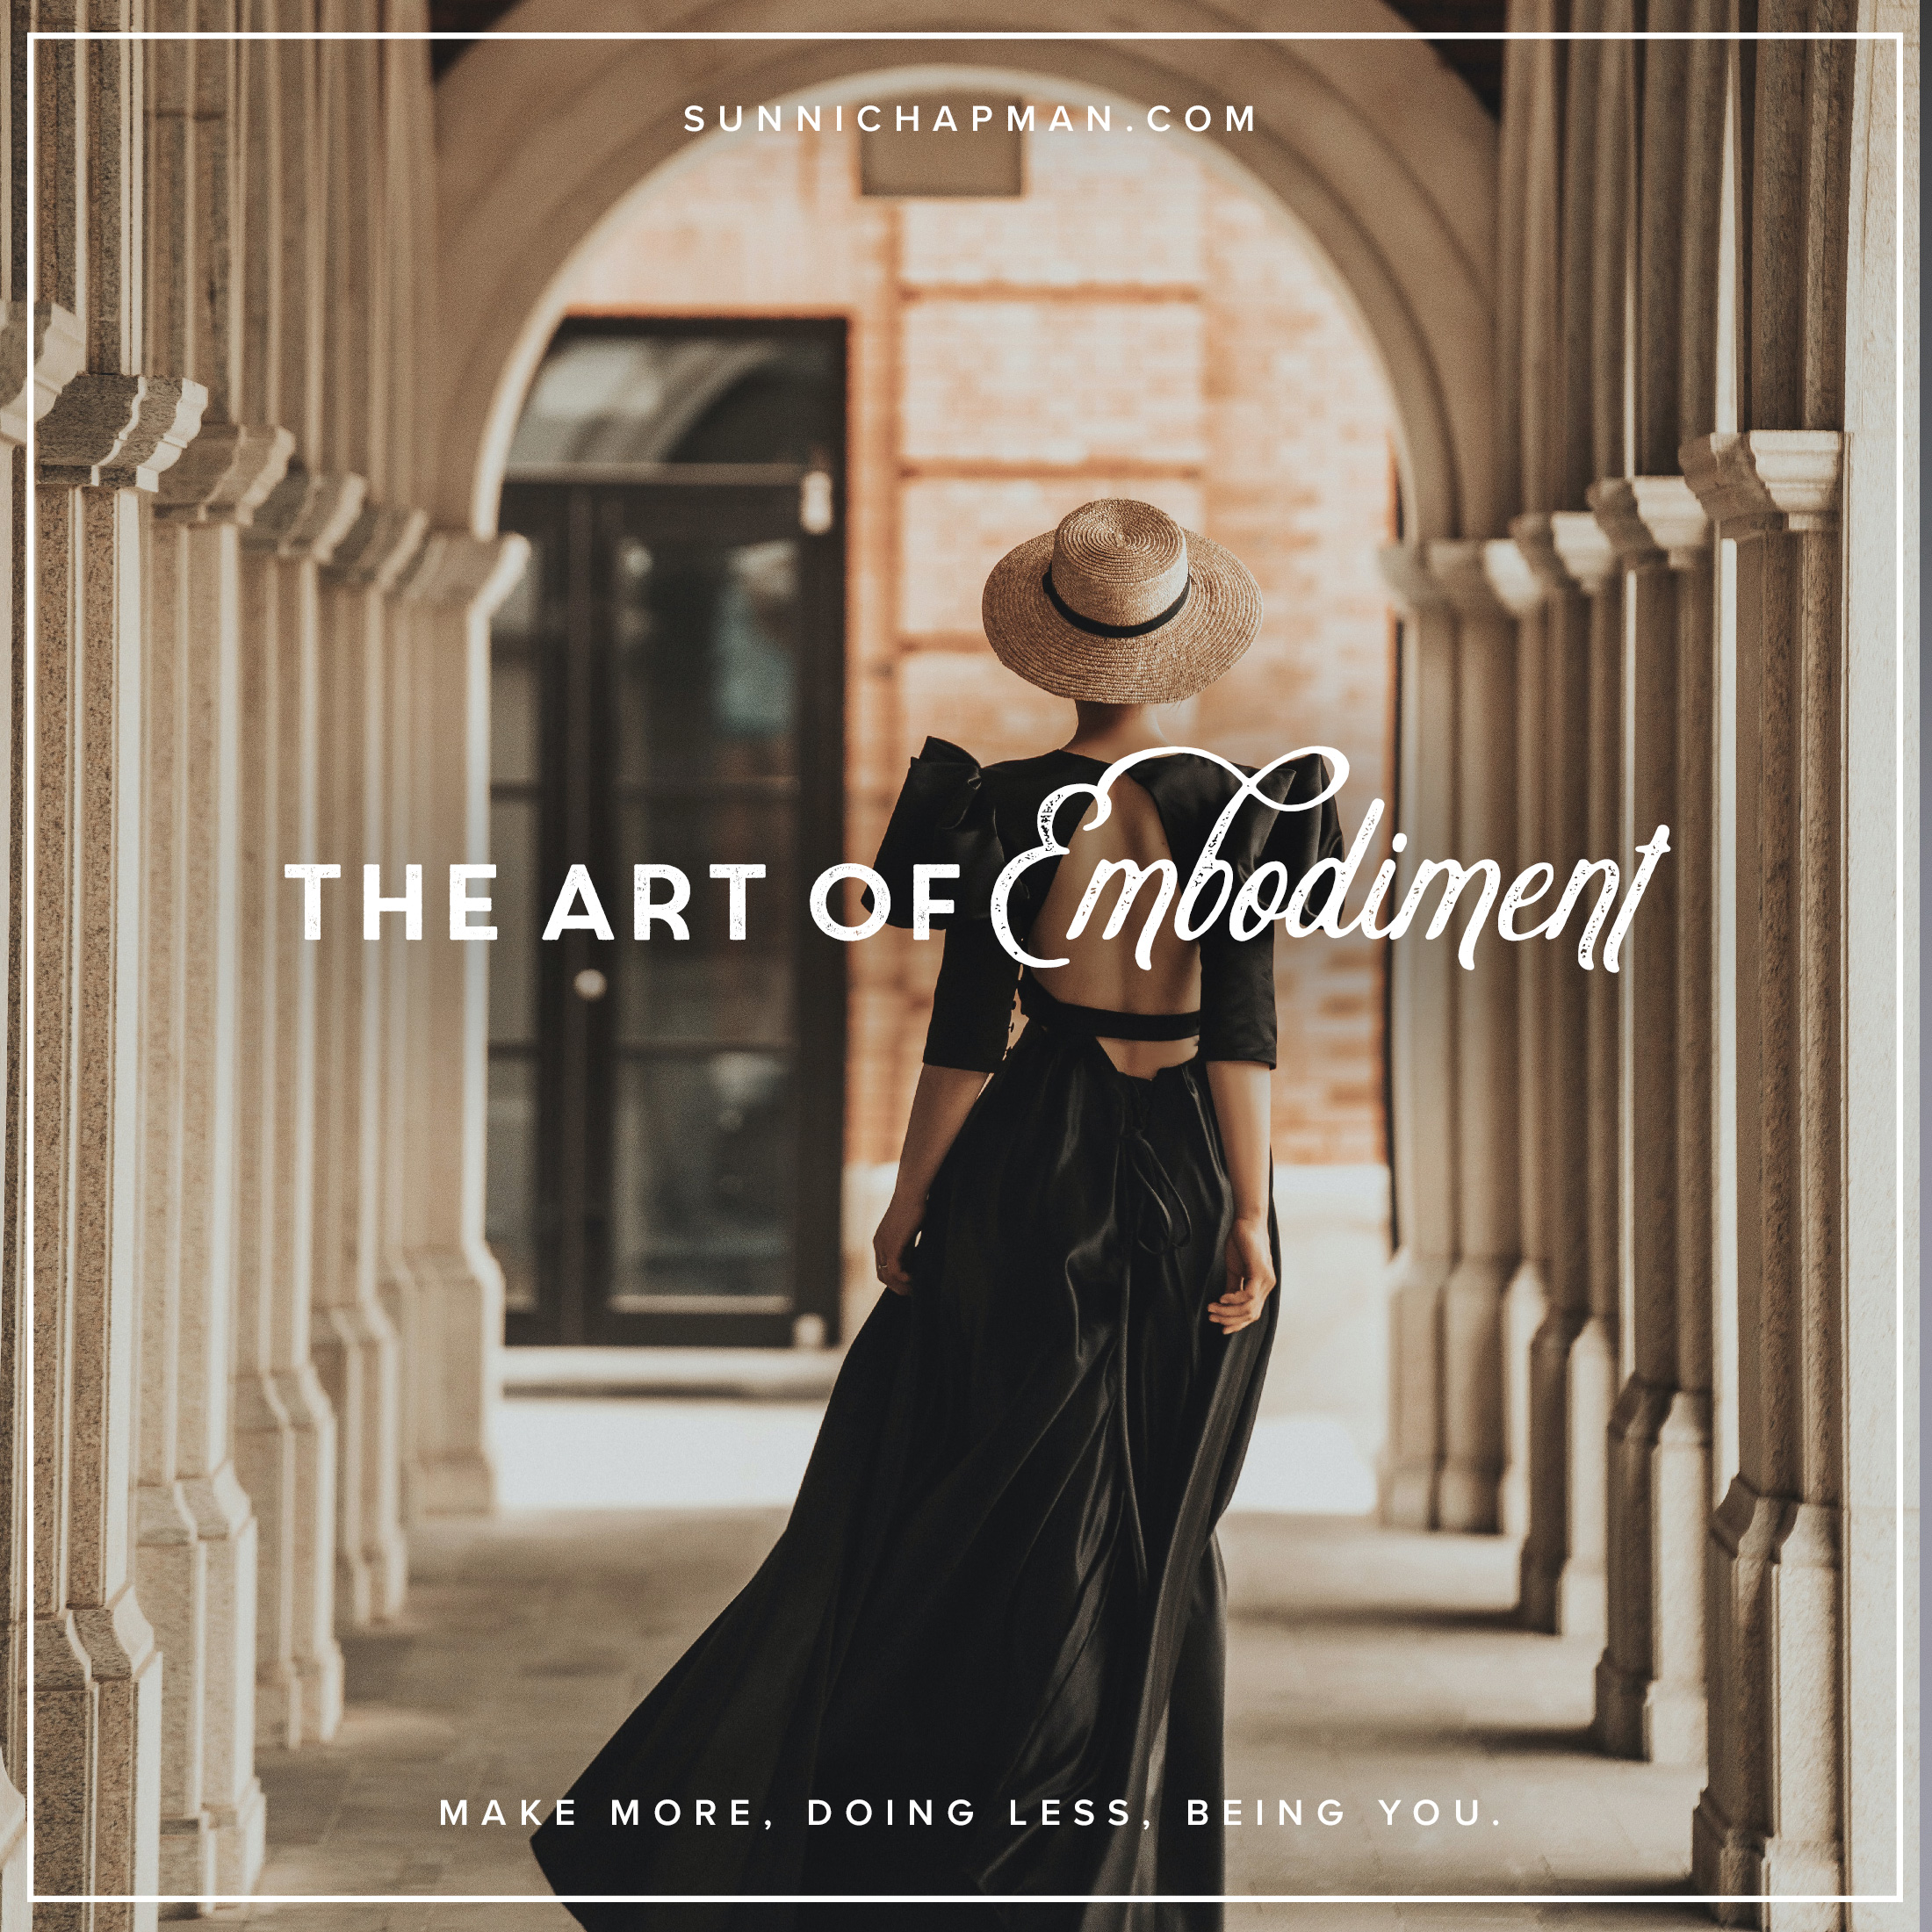 A ravishing woman in an elegant dress and hat, with her back turned, and the text: The Art Of Embodiment